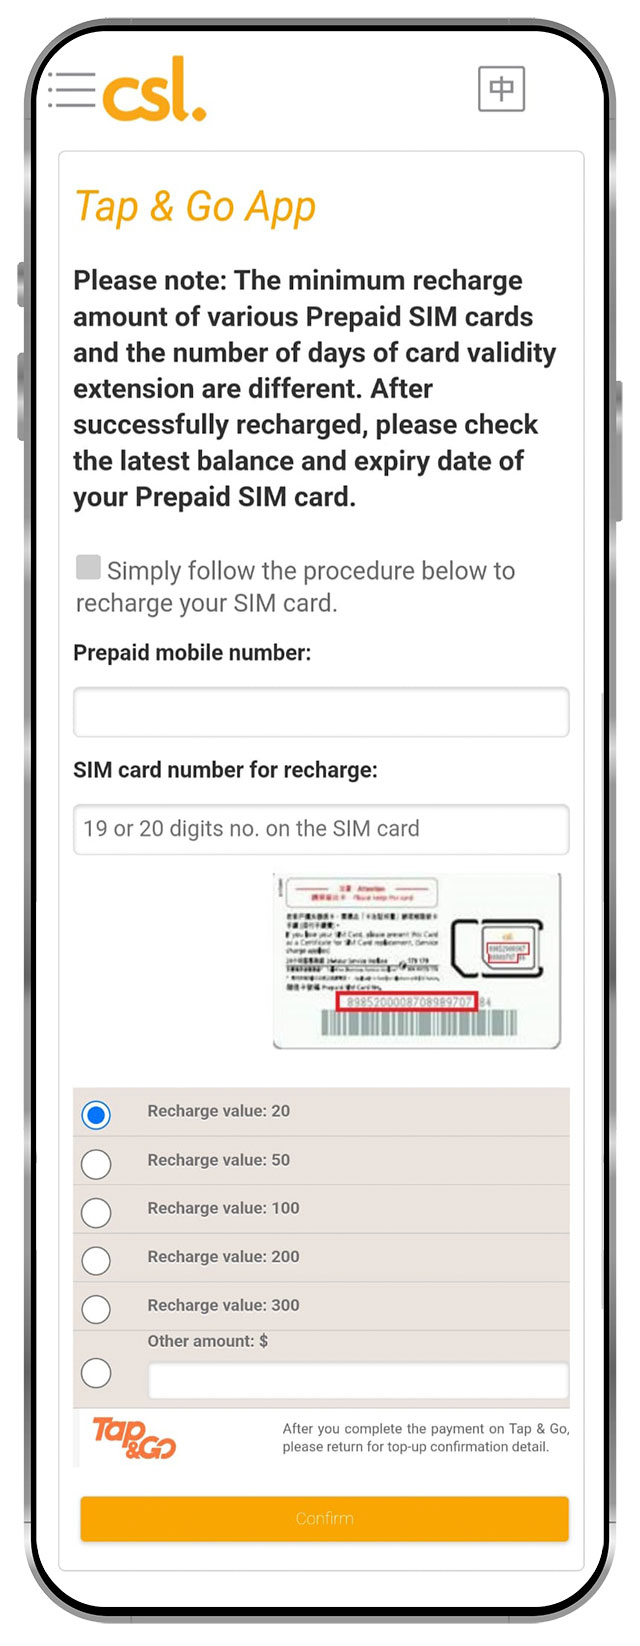 2. Enter the phone number, select / enter the top-up amount, press 